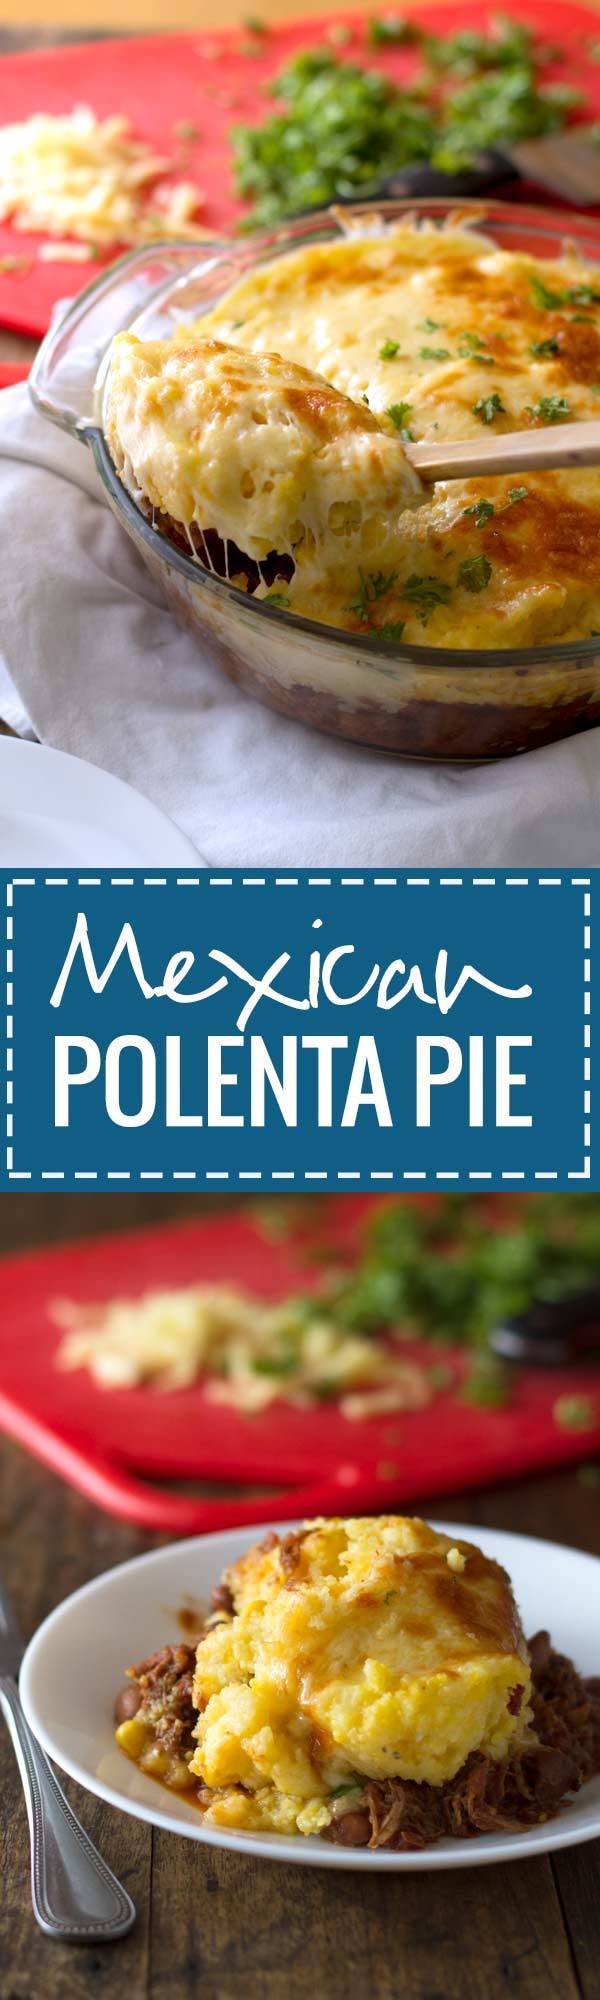 This Mexican polenta pie is true comfort food! Made with pork and pinto beans in the crockpot and baked with polenta and cheese.